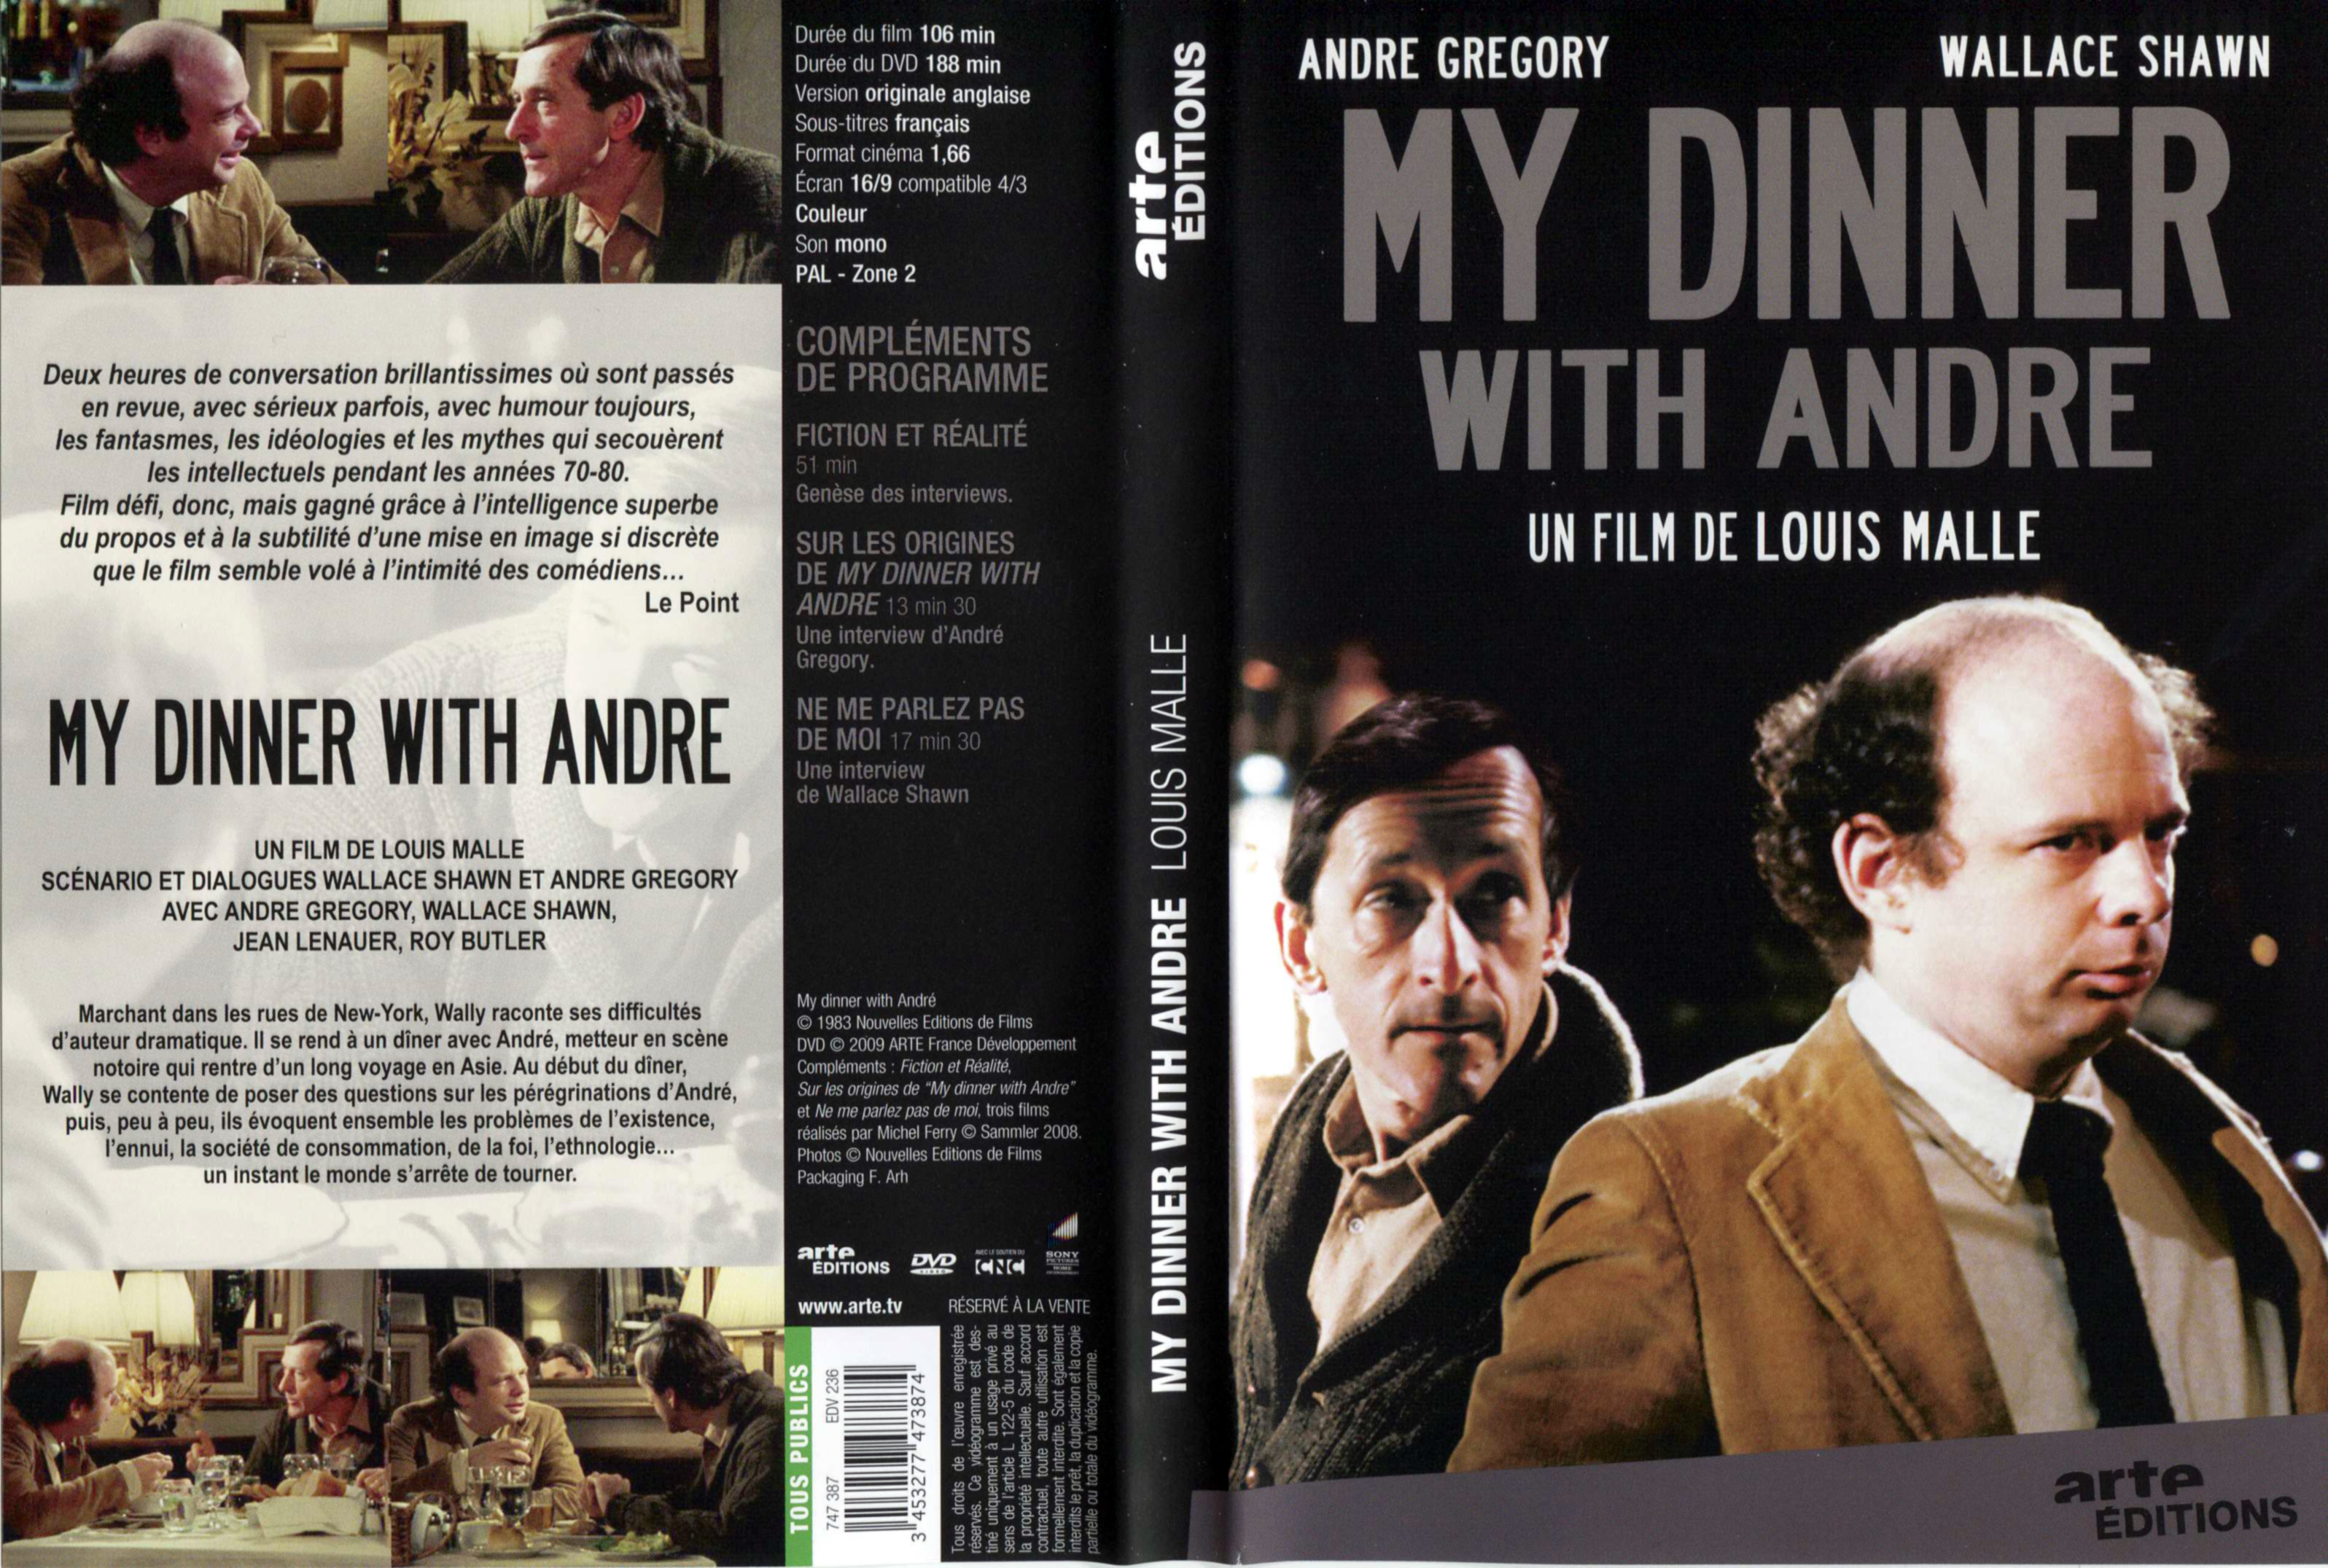 Jaquette DVD My dinner with Andr